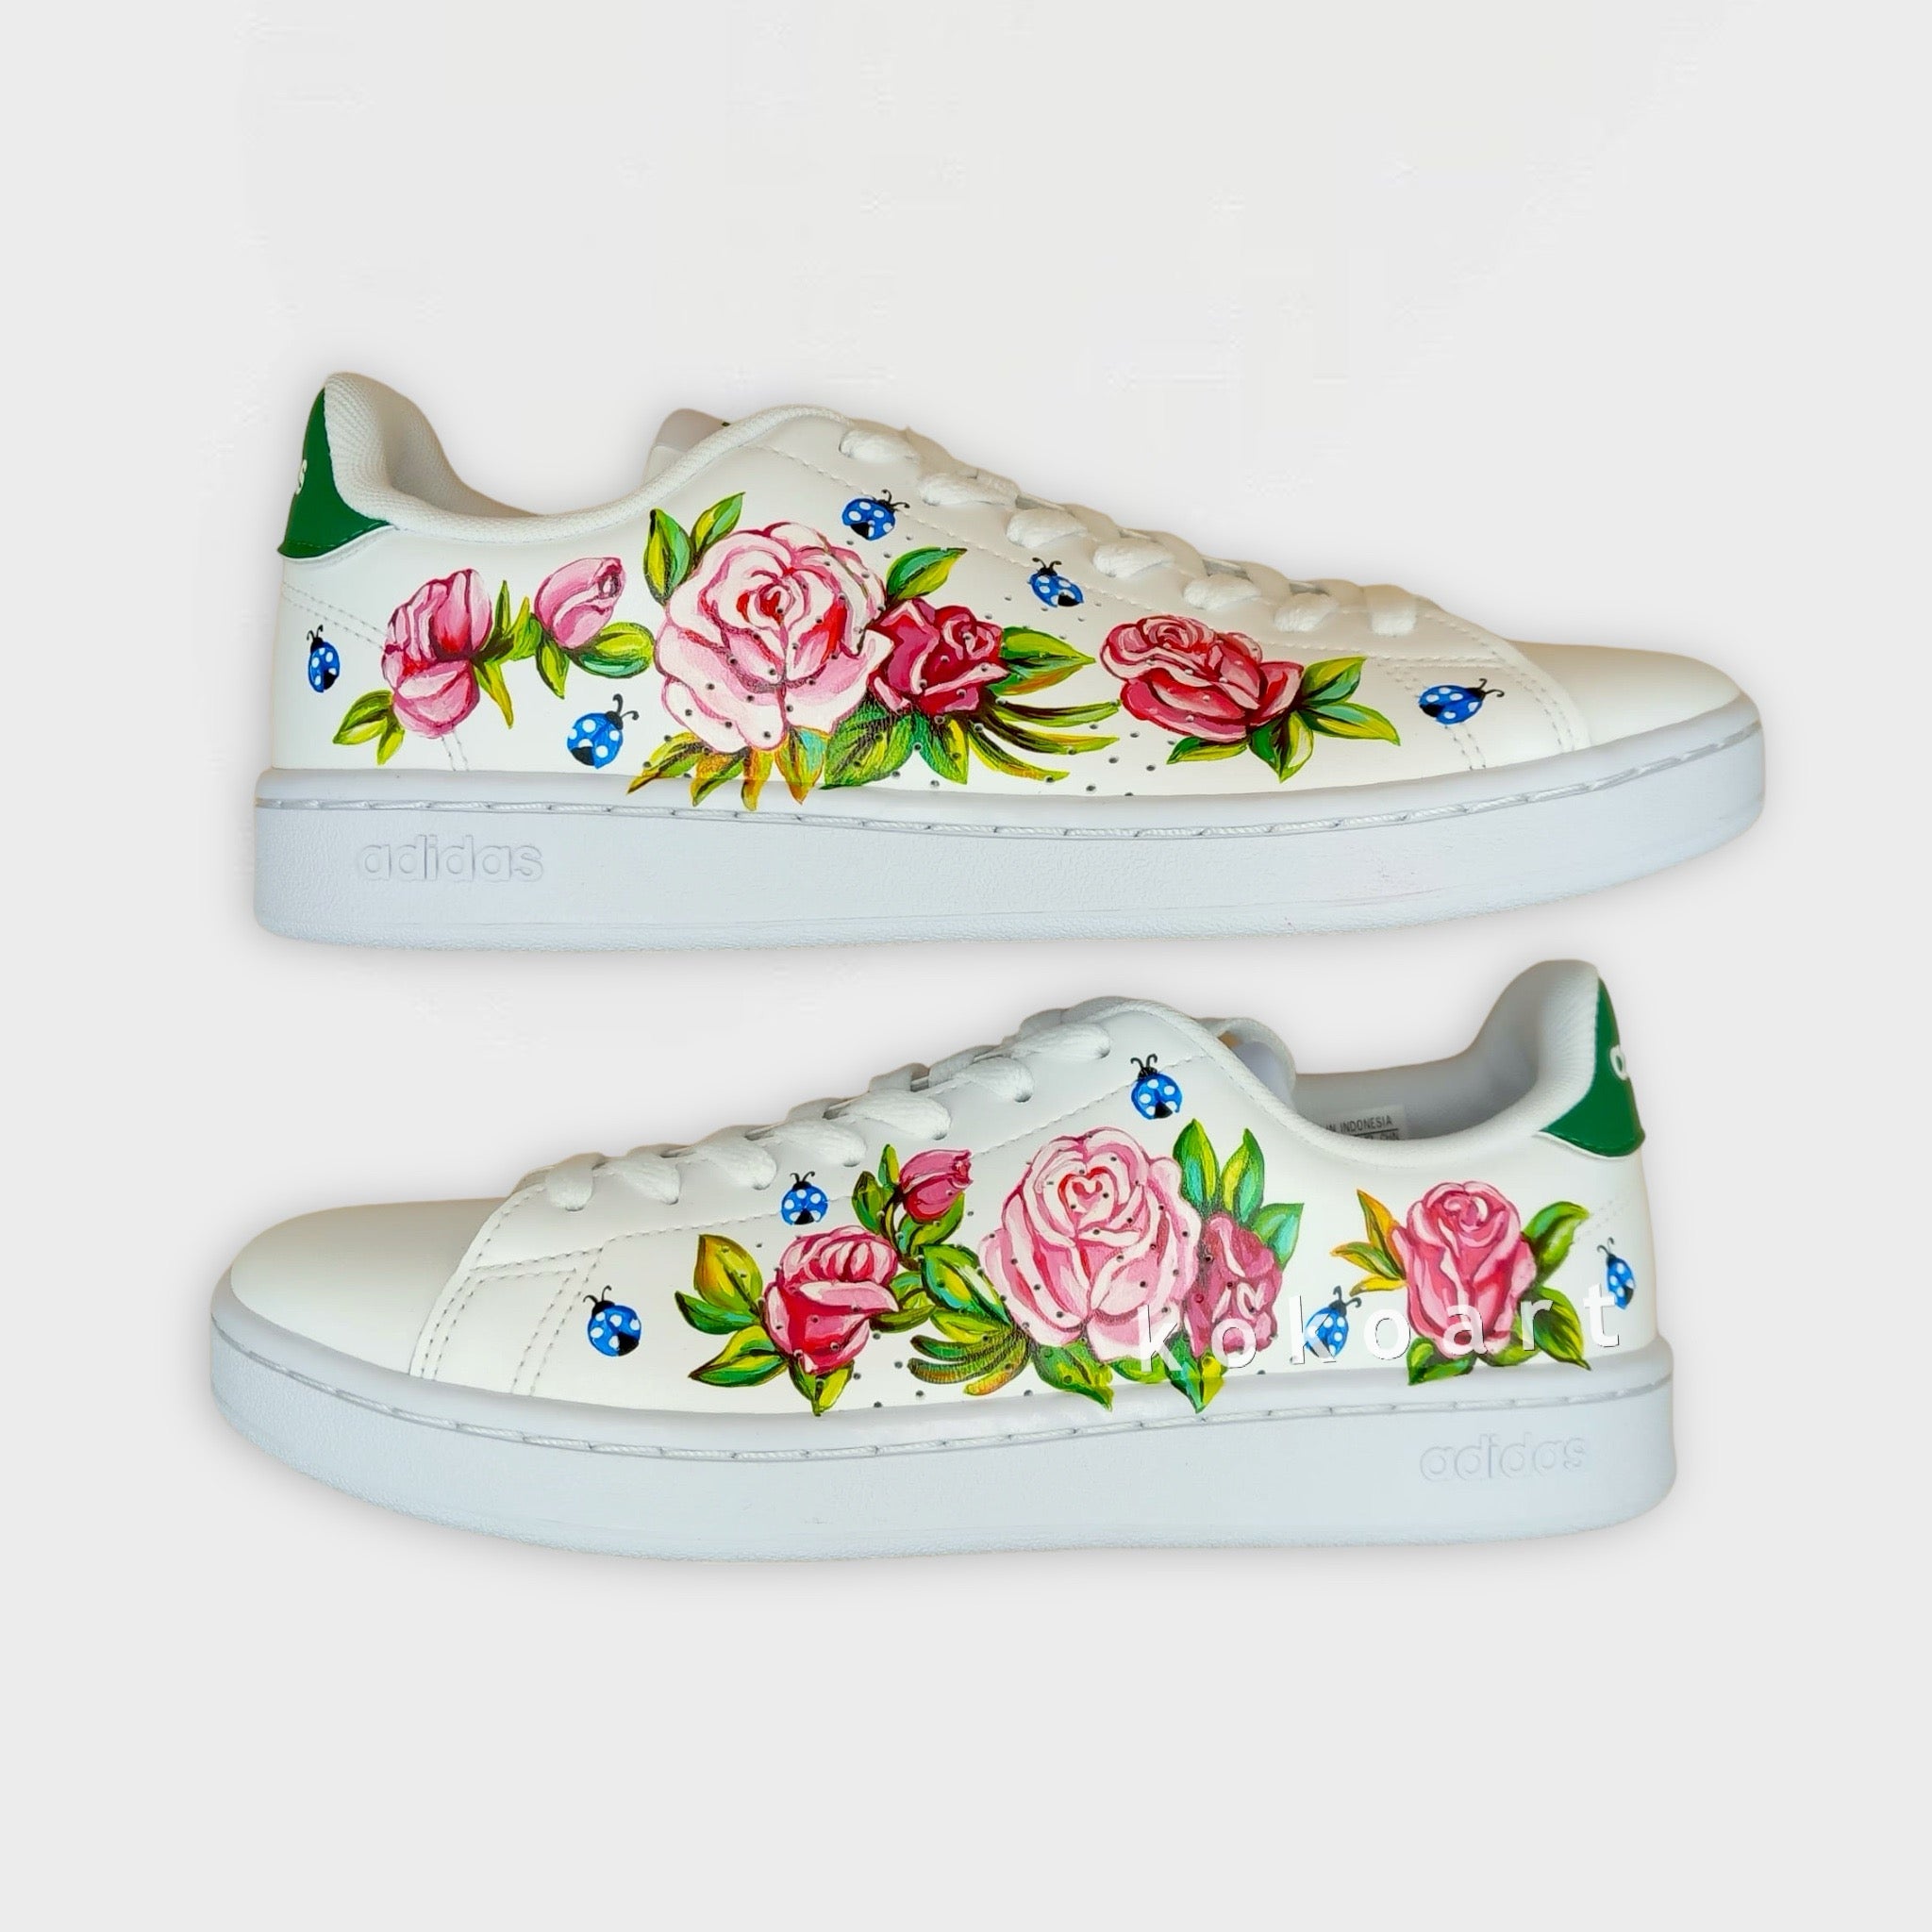 Stan Smith Hand Painted Floral design